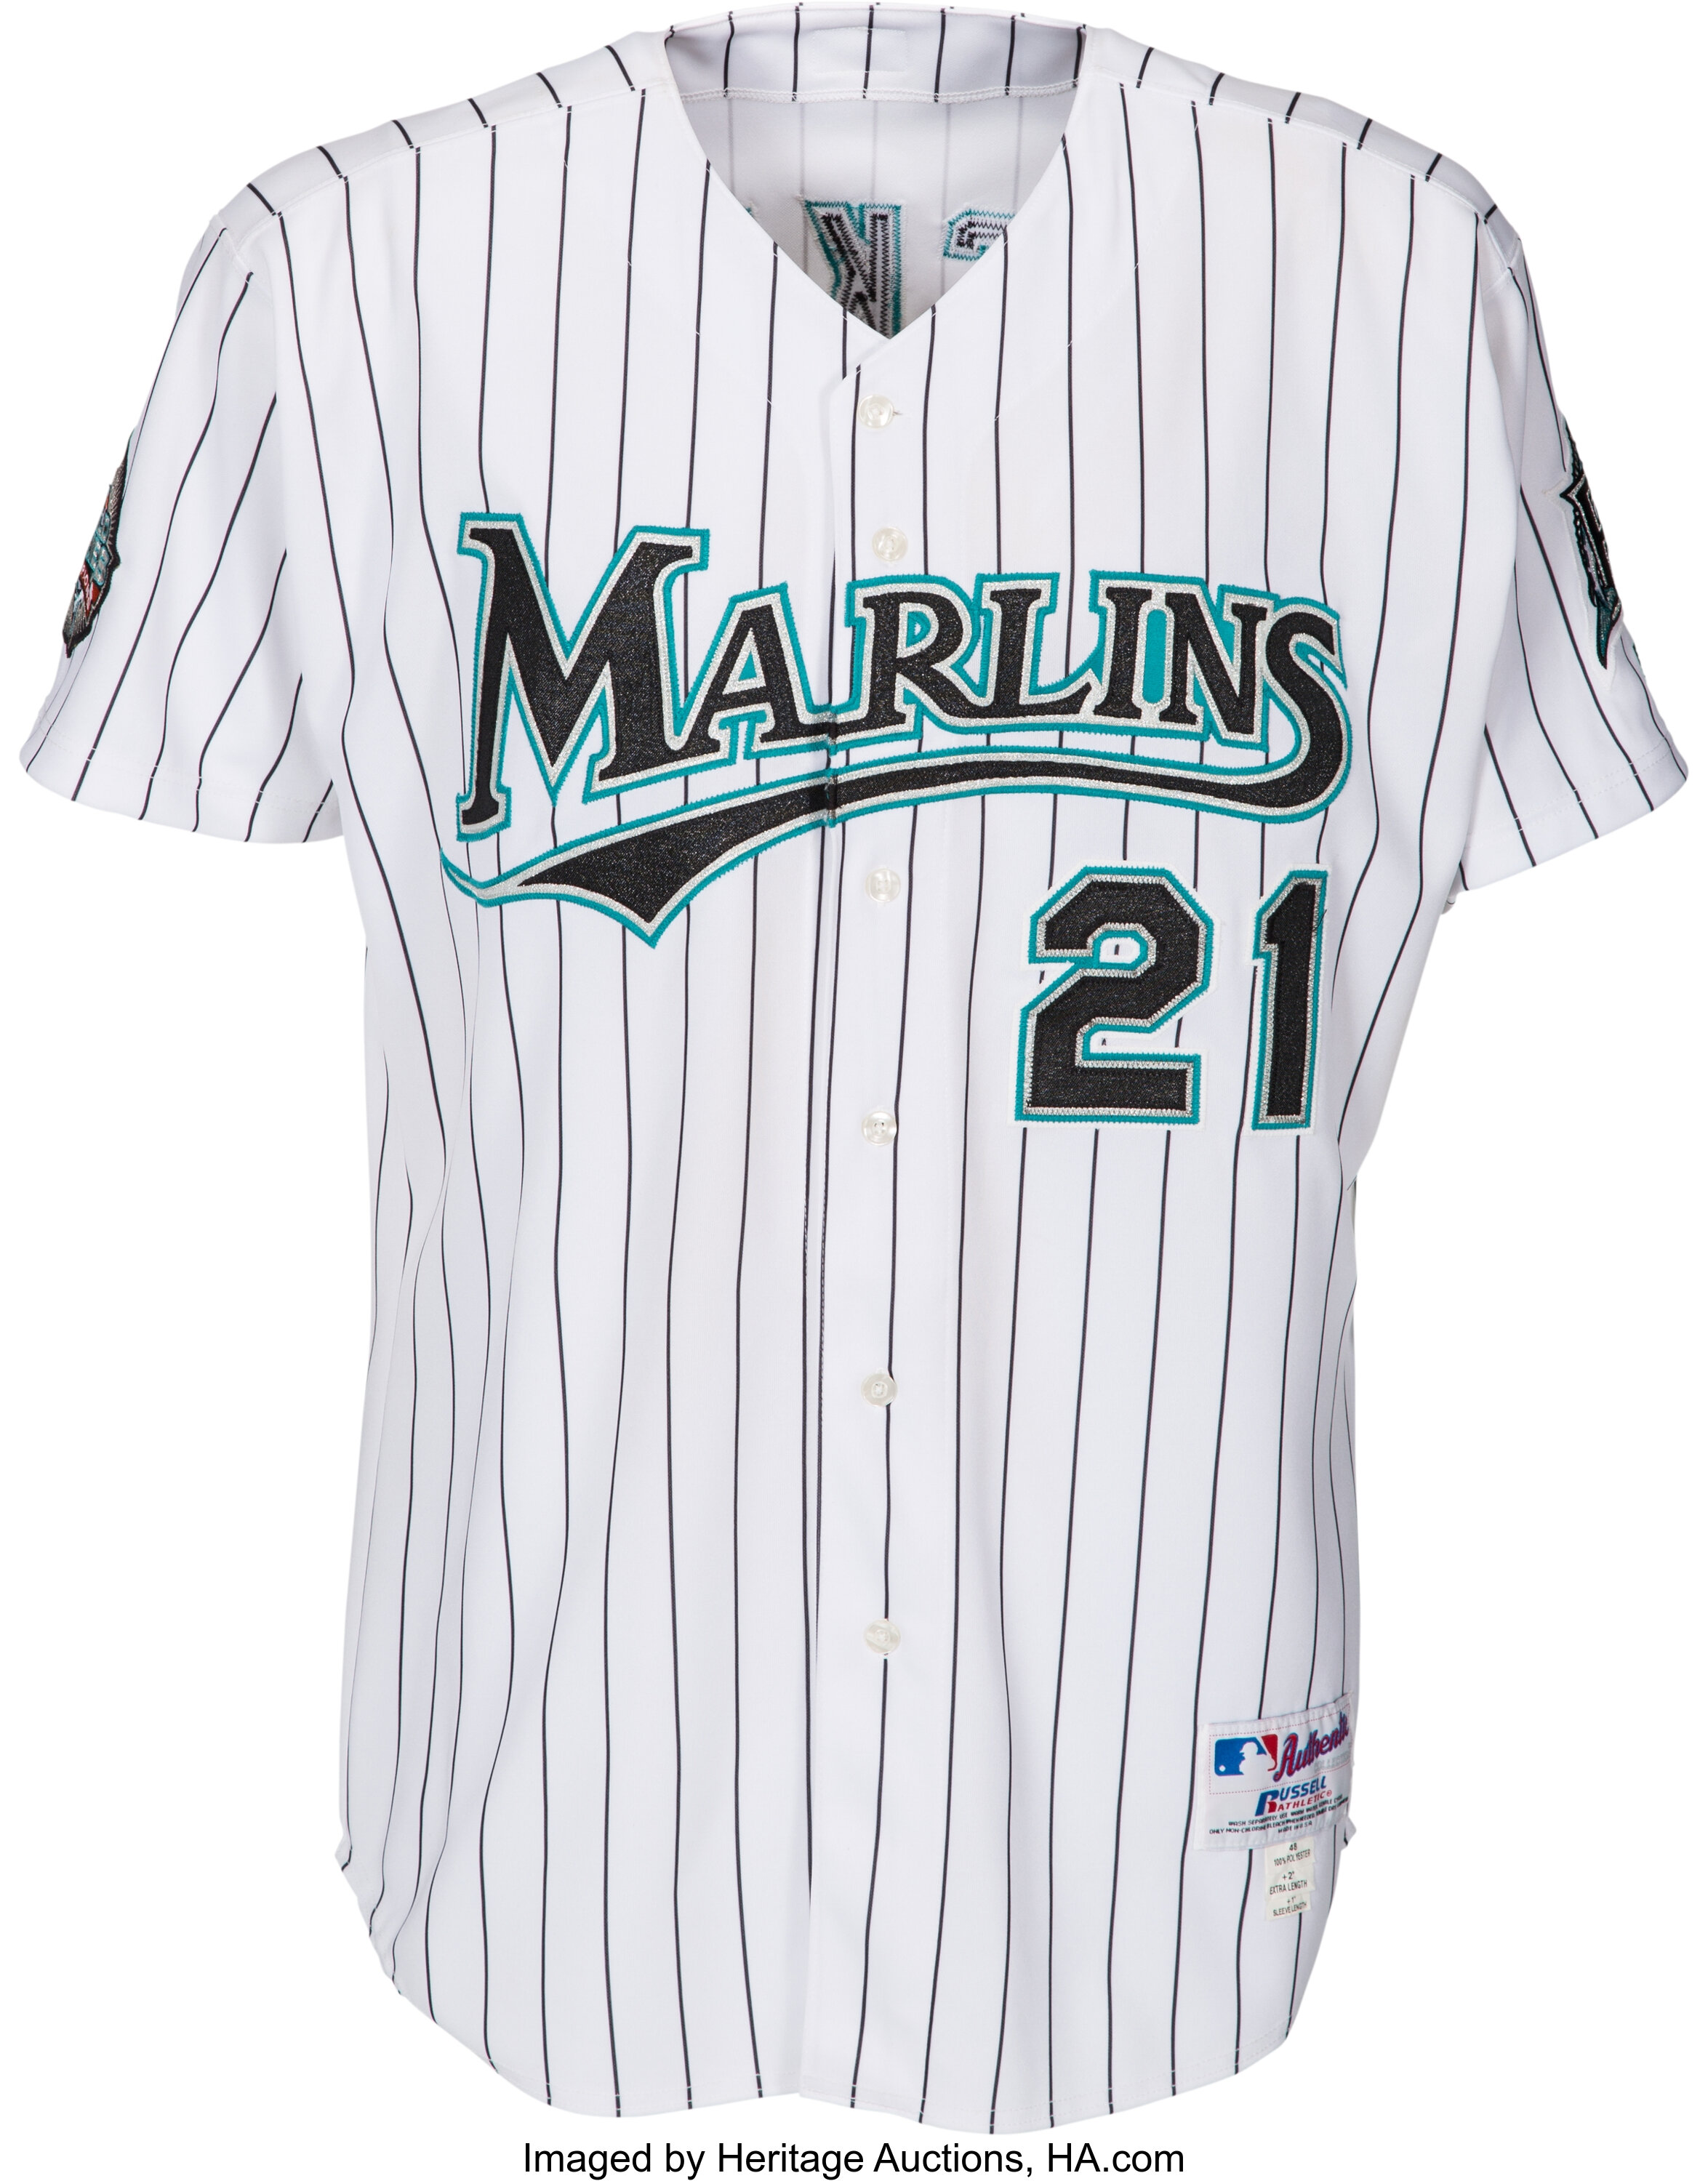 1993-02 Florida Marlins #59 Game Issued White Jersey 46 DP14328